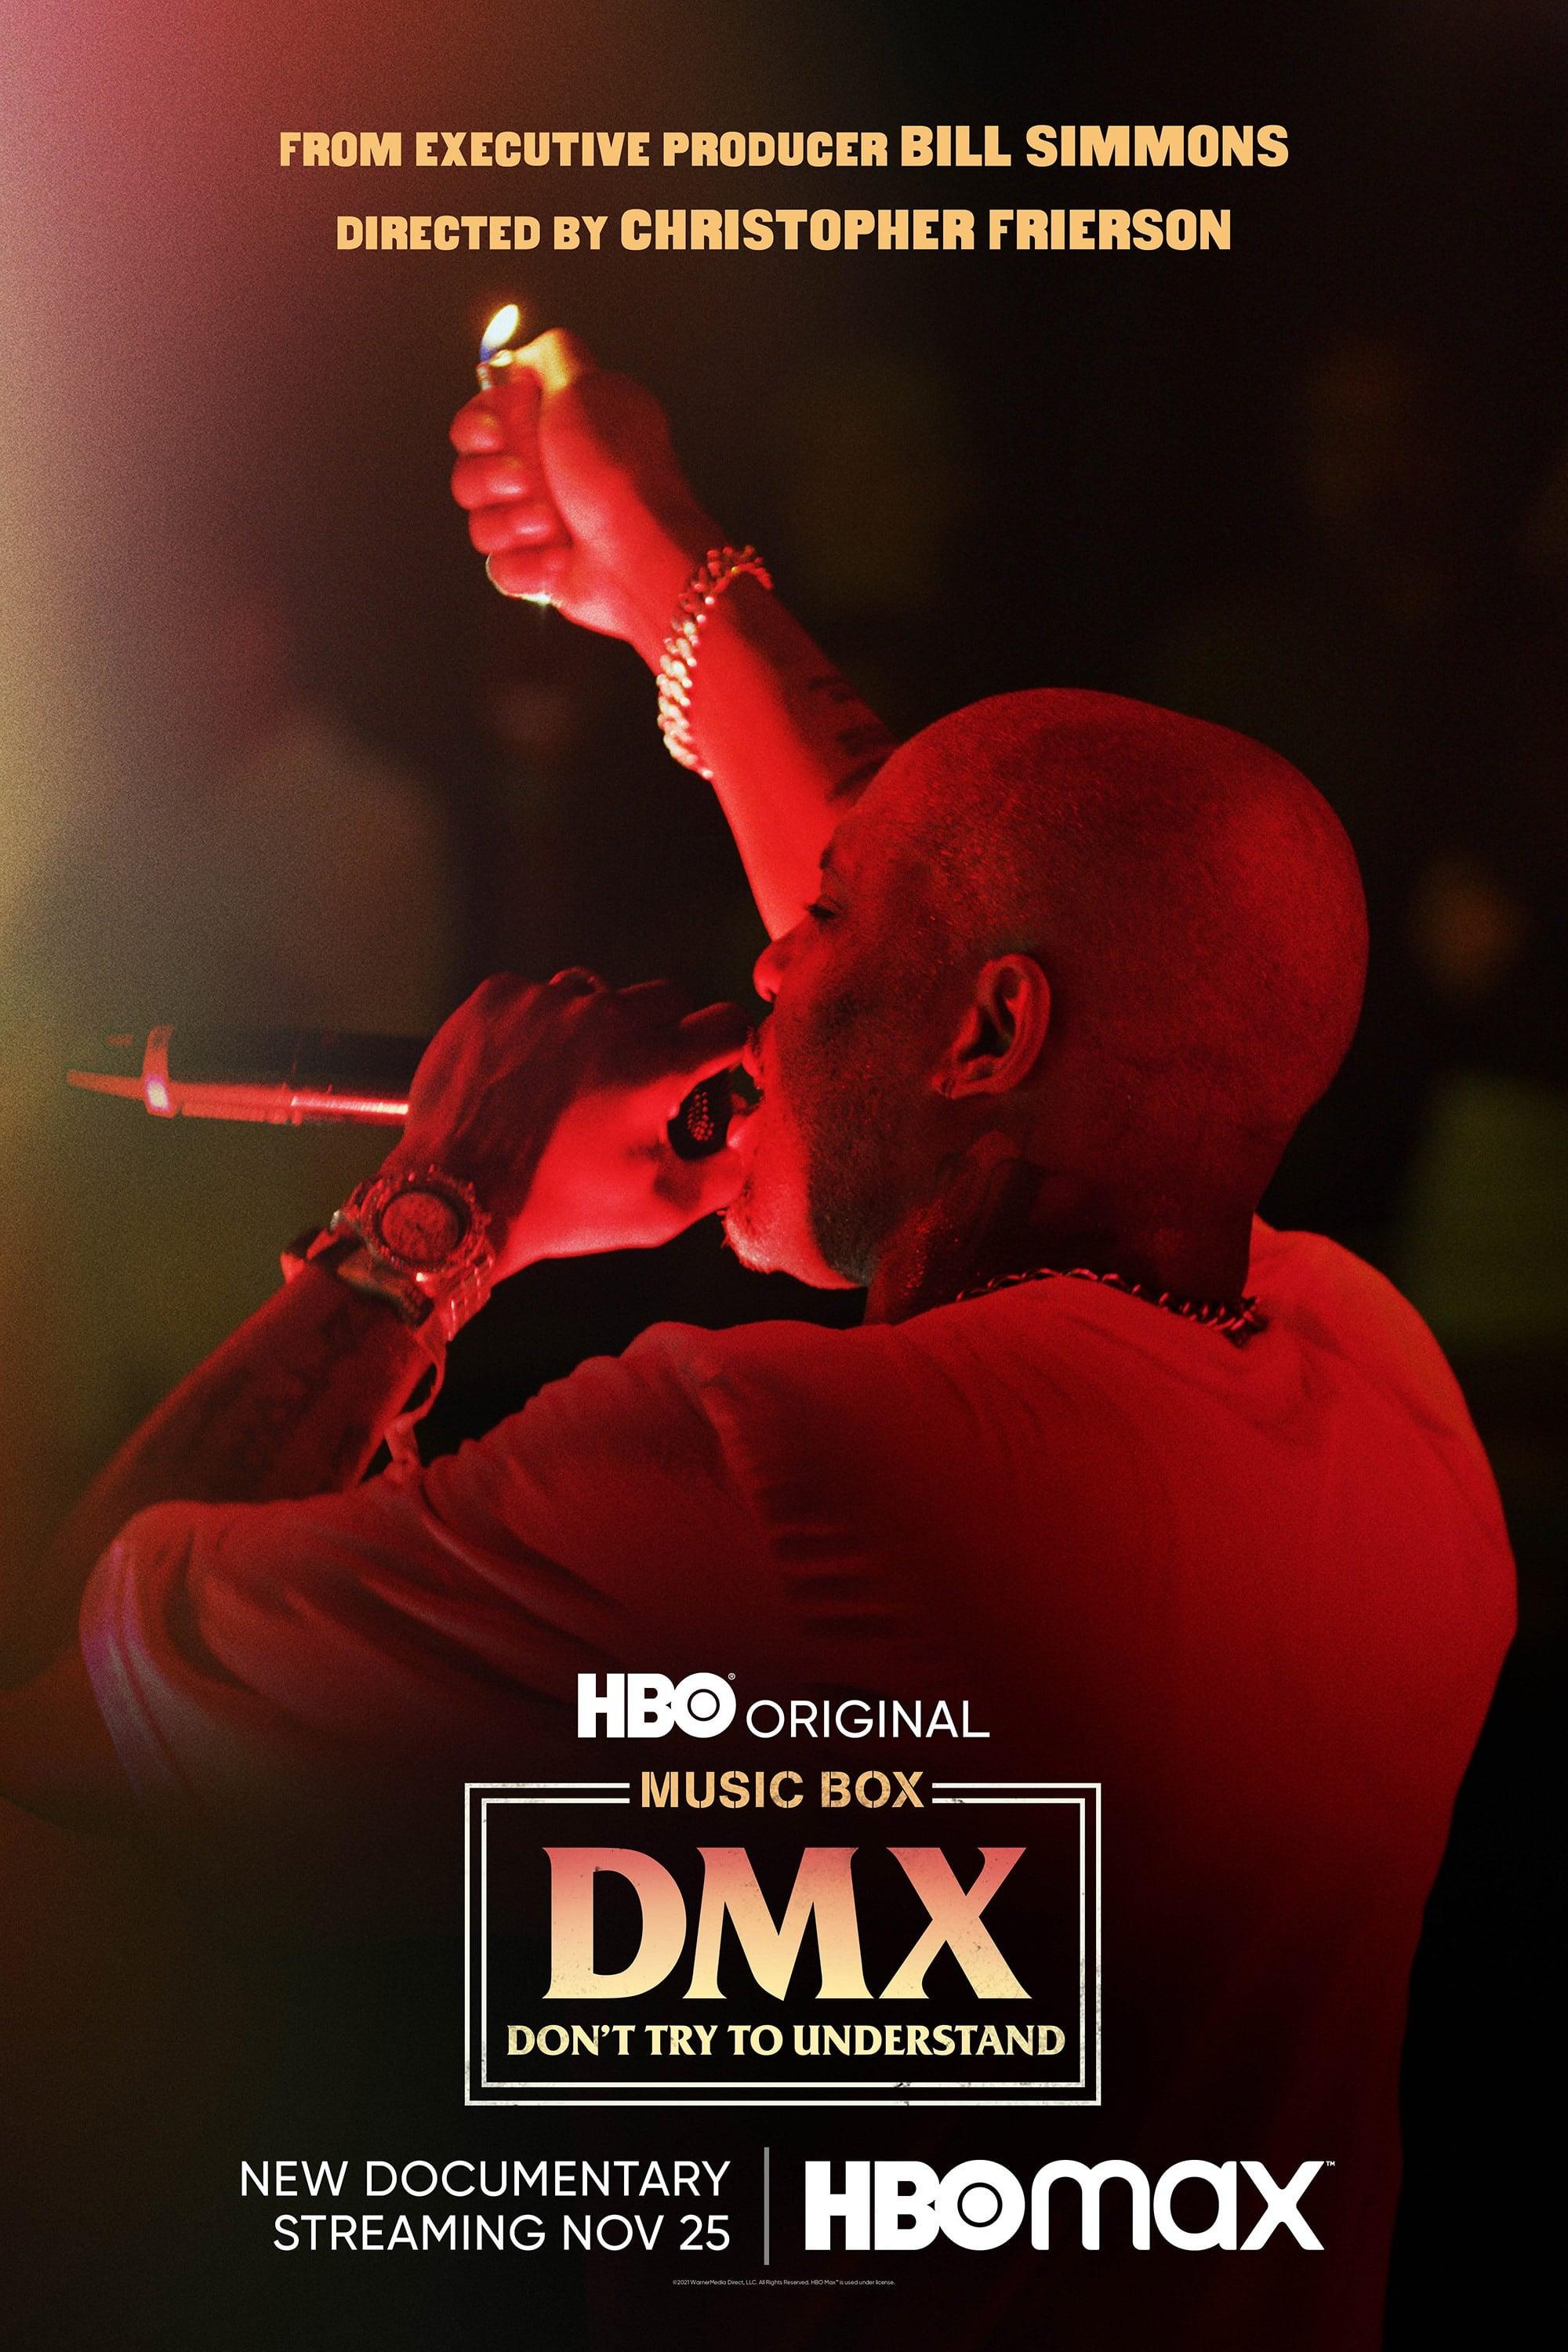 DMX: Don't Try to Understand poster